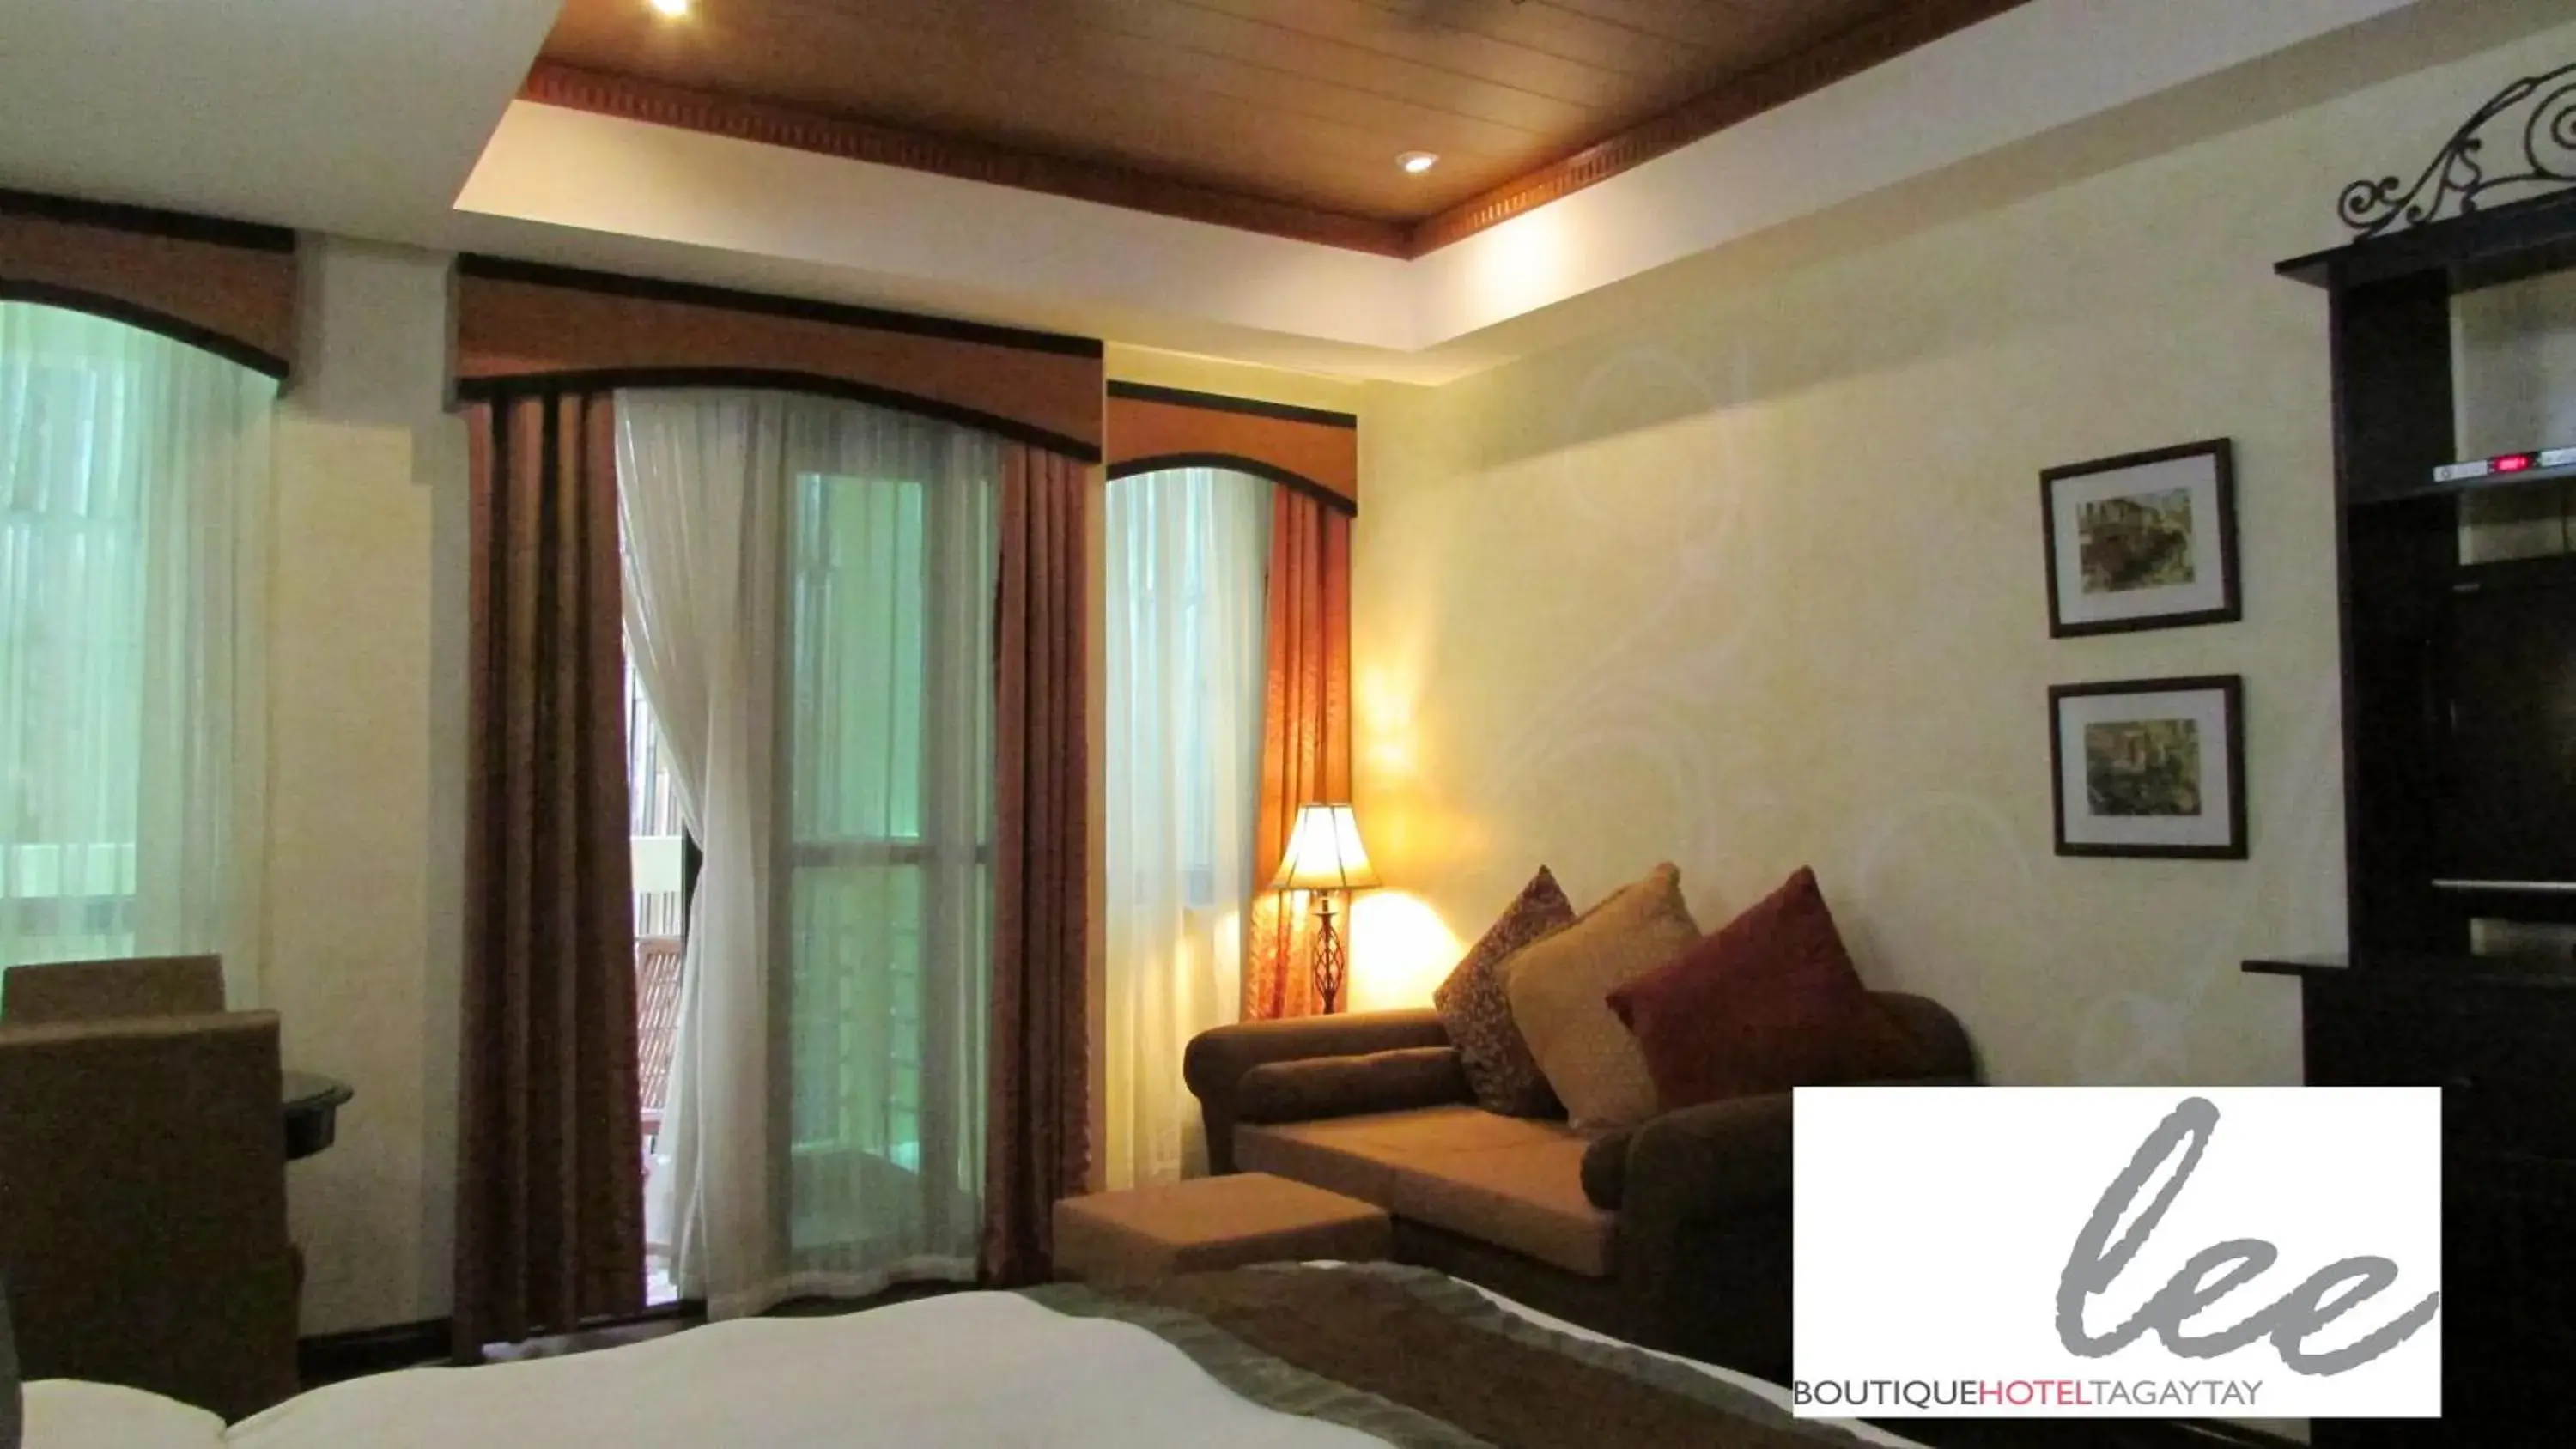 Bedroom, Seating Area in Lee Boutique Hotel Tagaytay